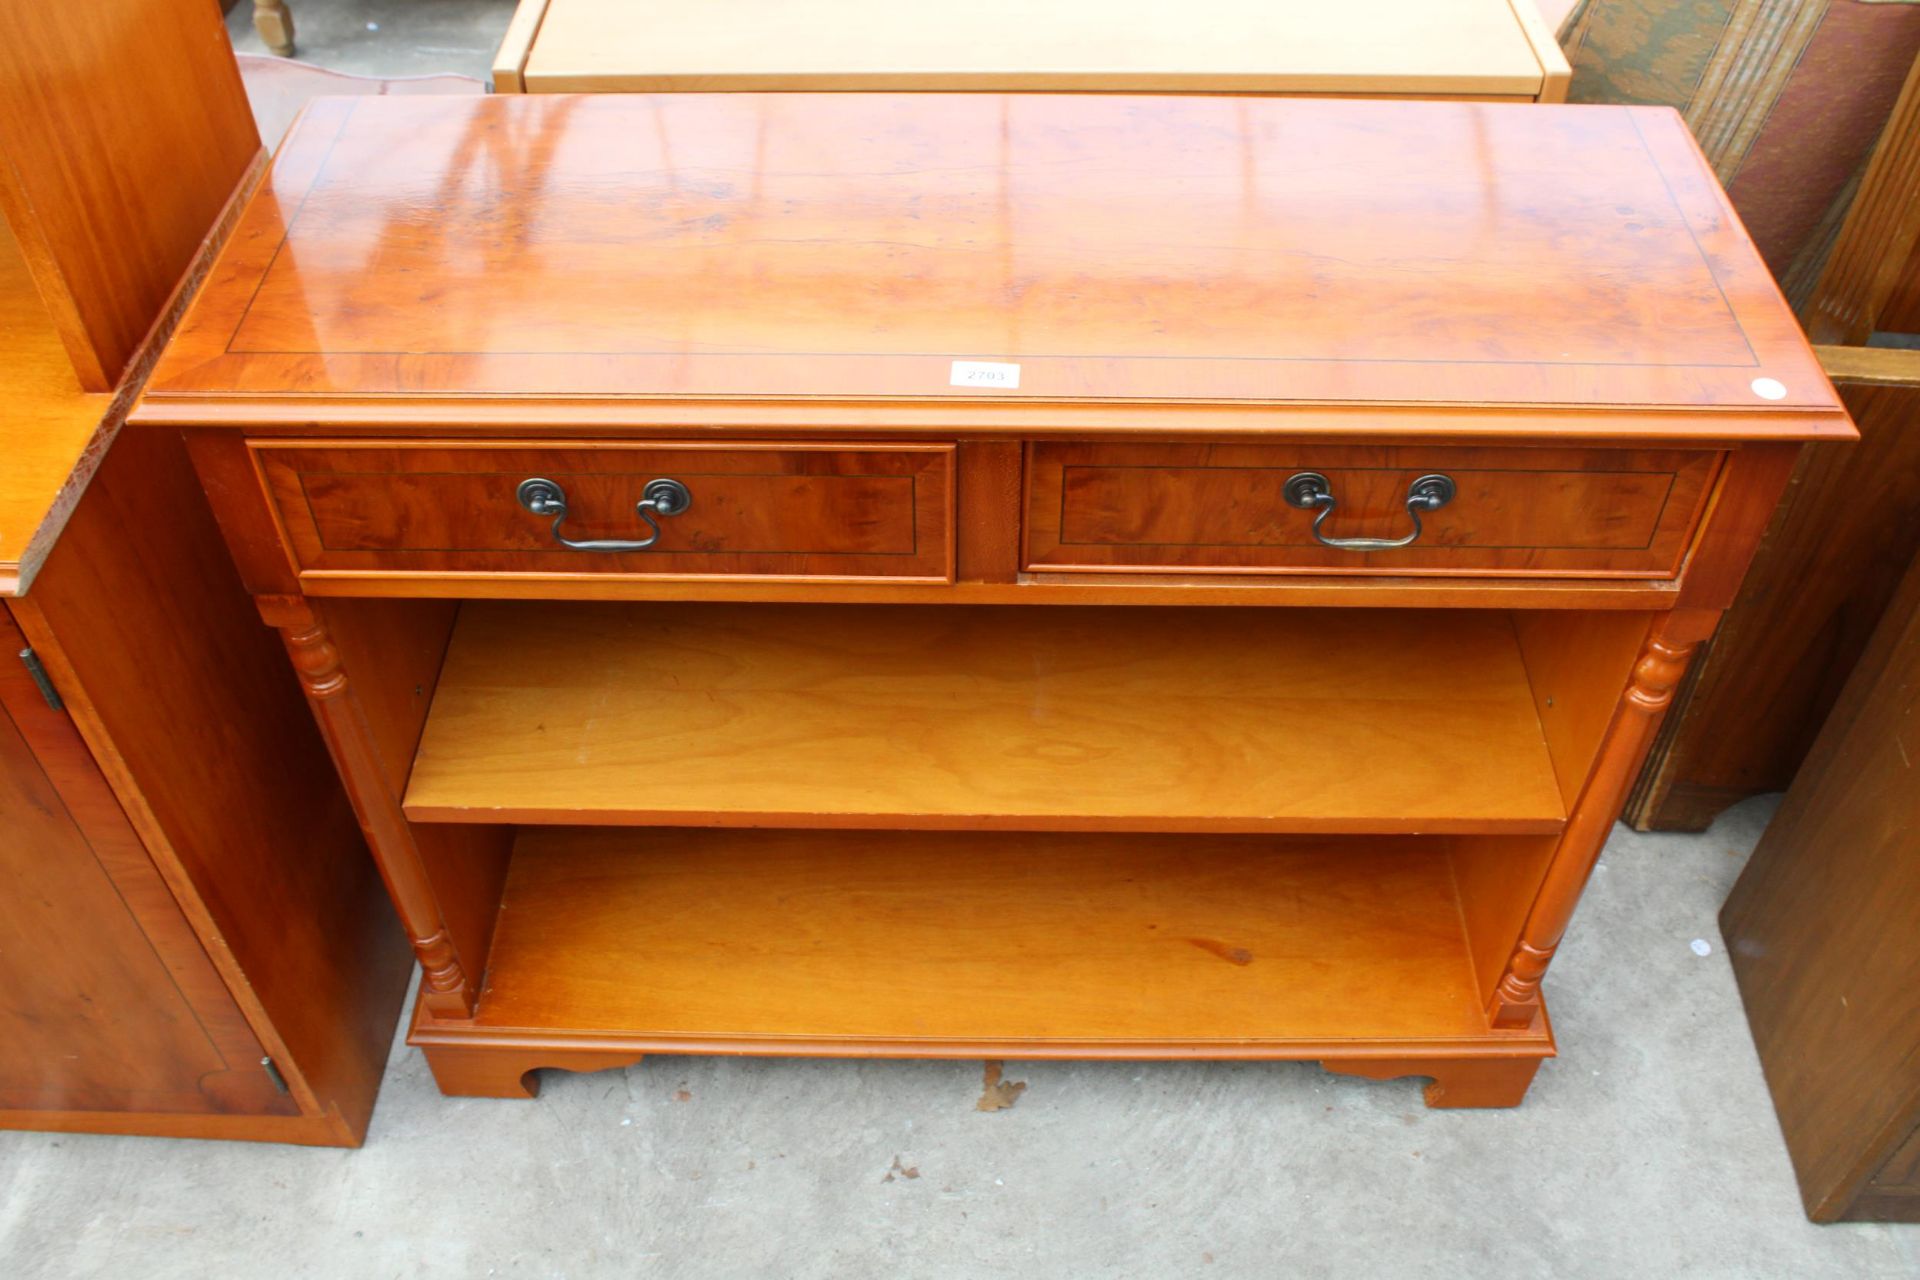 A MODERN YEW WOOD CONSOLE TABLE WITH TWO FRIEZE DRAWERS, 40" WIDE